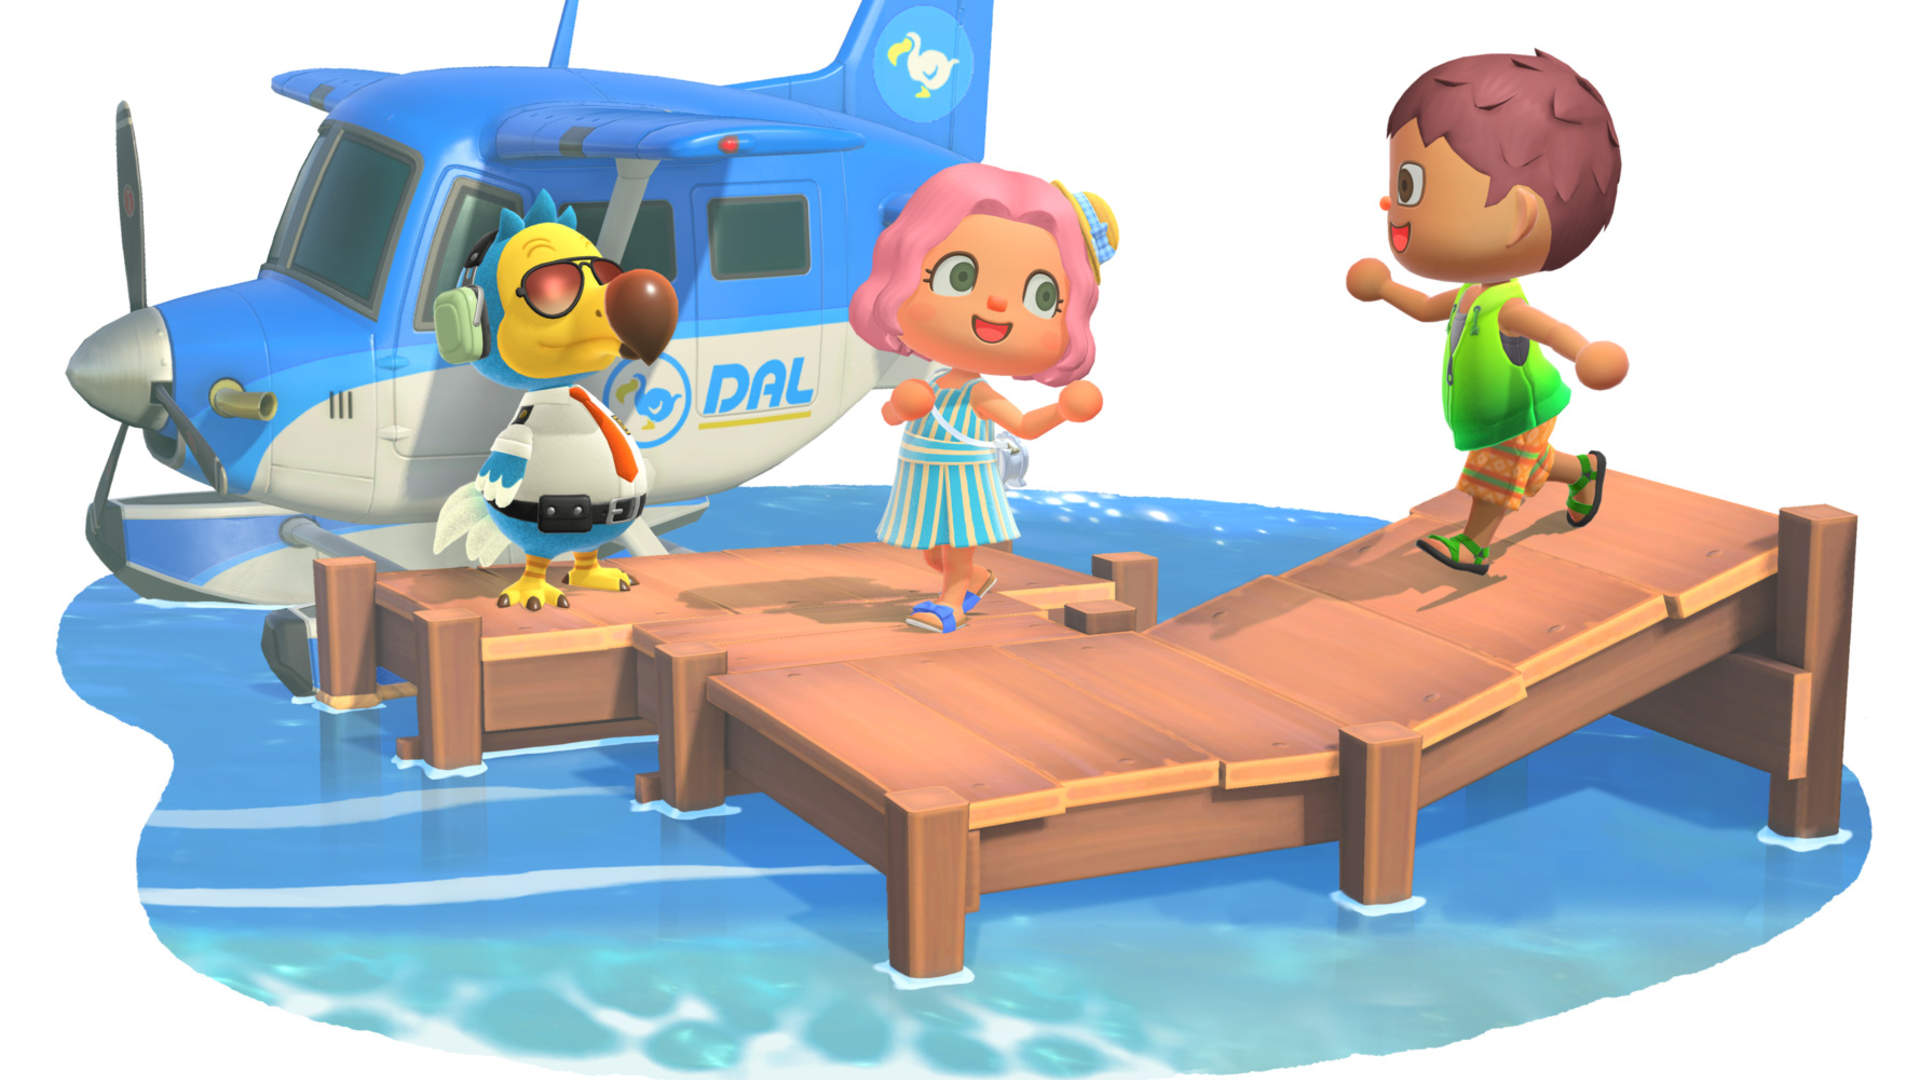 Video Game Animal Crossing: New Horizons HD Wallpaper | Background Image